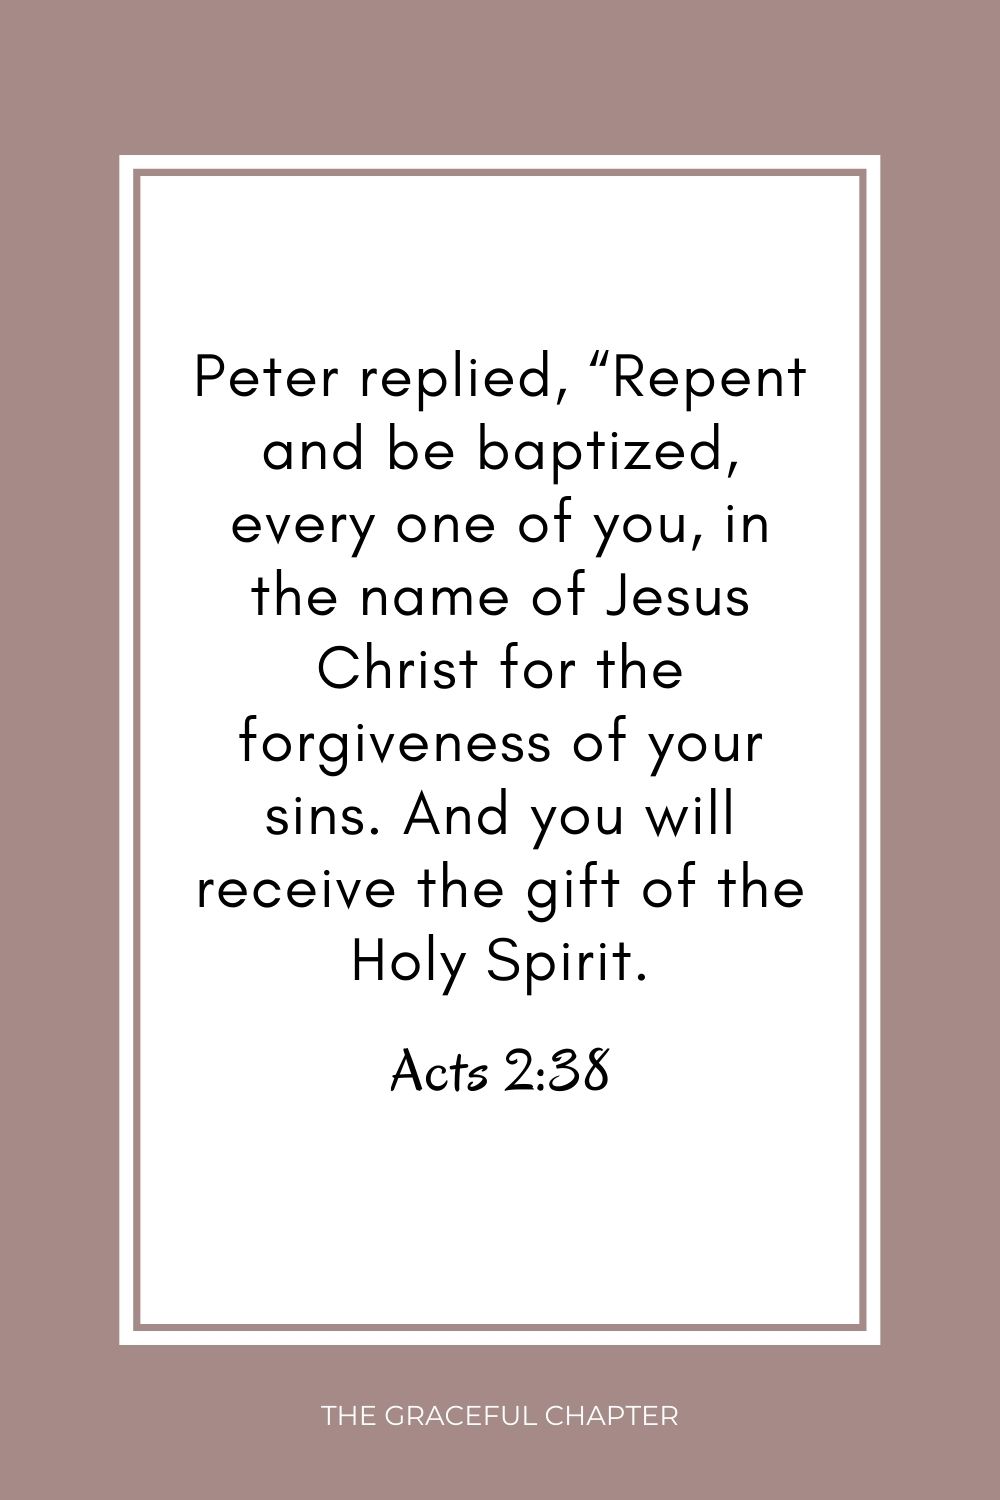 Peter replied, “Repent and be baptized, every one of you, in the name of Jesus Christ for the forgiveness of your sins. And you will receive the gift of the Holy Spirit. Acts 2:38